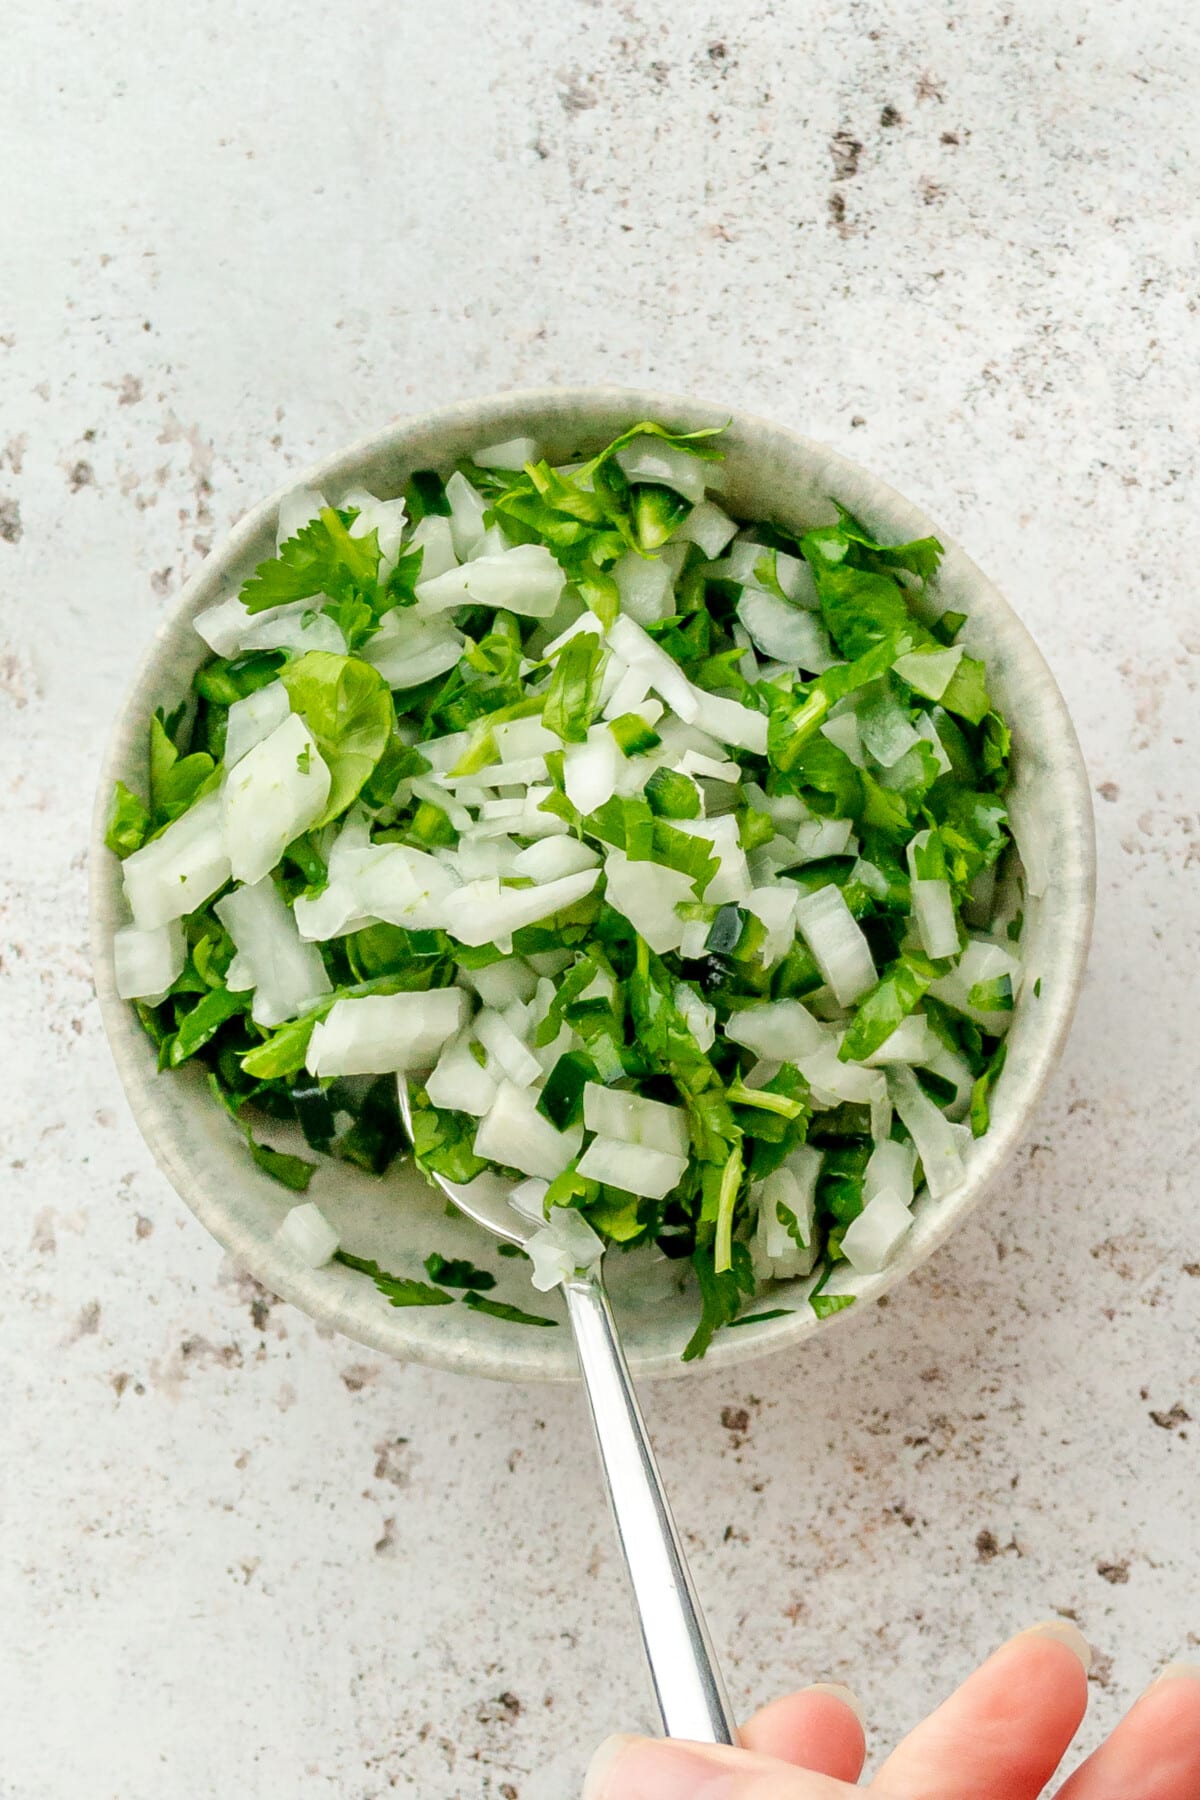 A white onion and cilantro relish is stirred in a small blue ceramic bowl on a light grey surface.